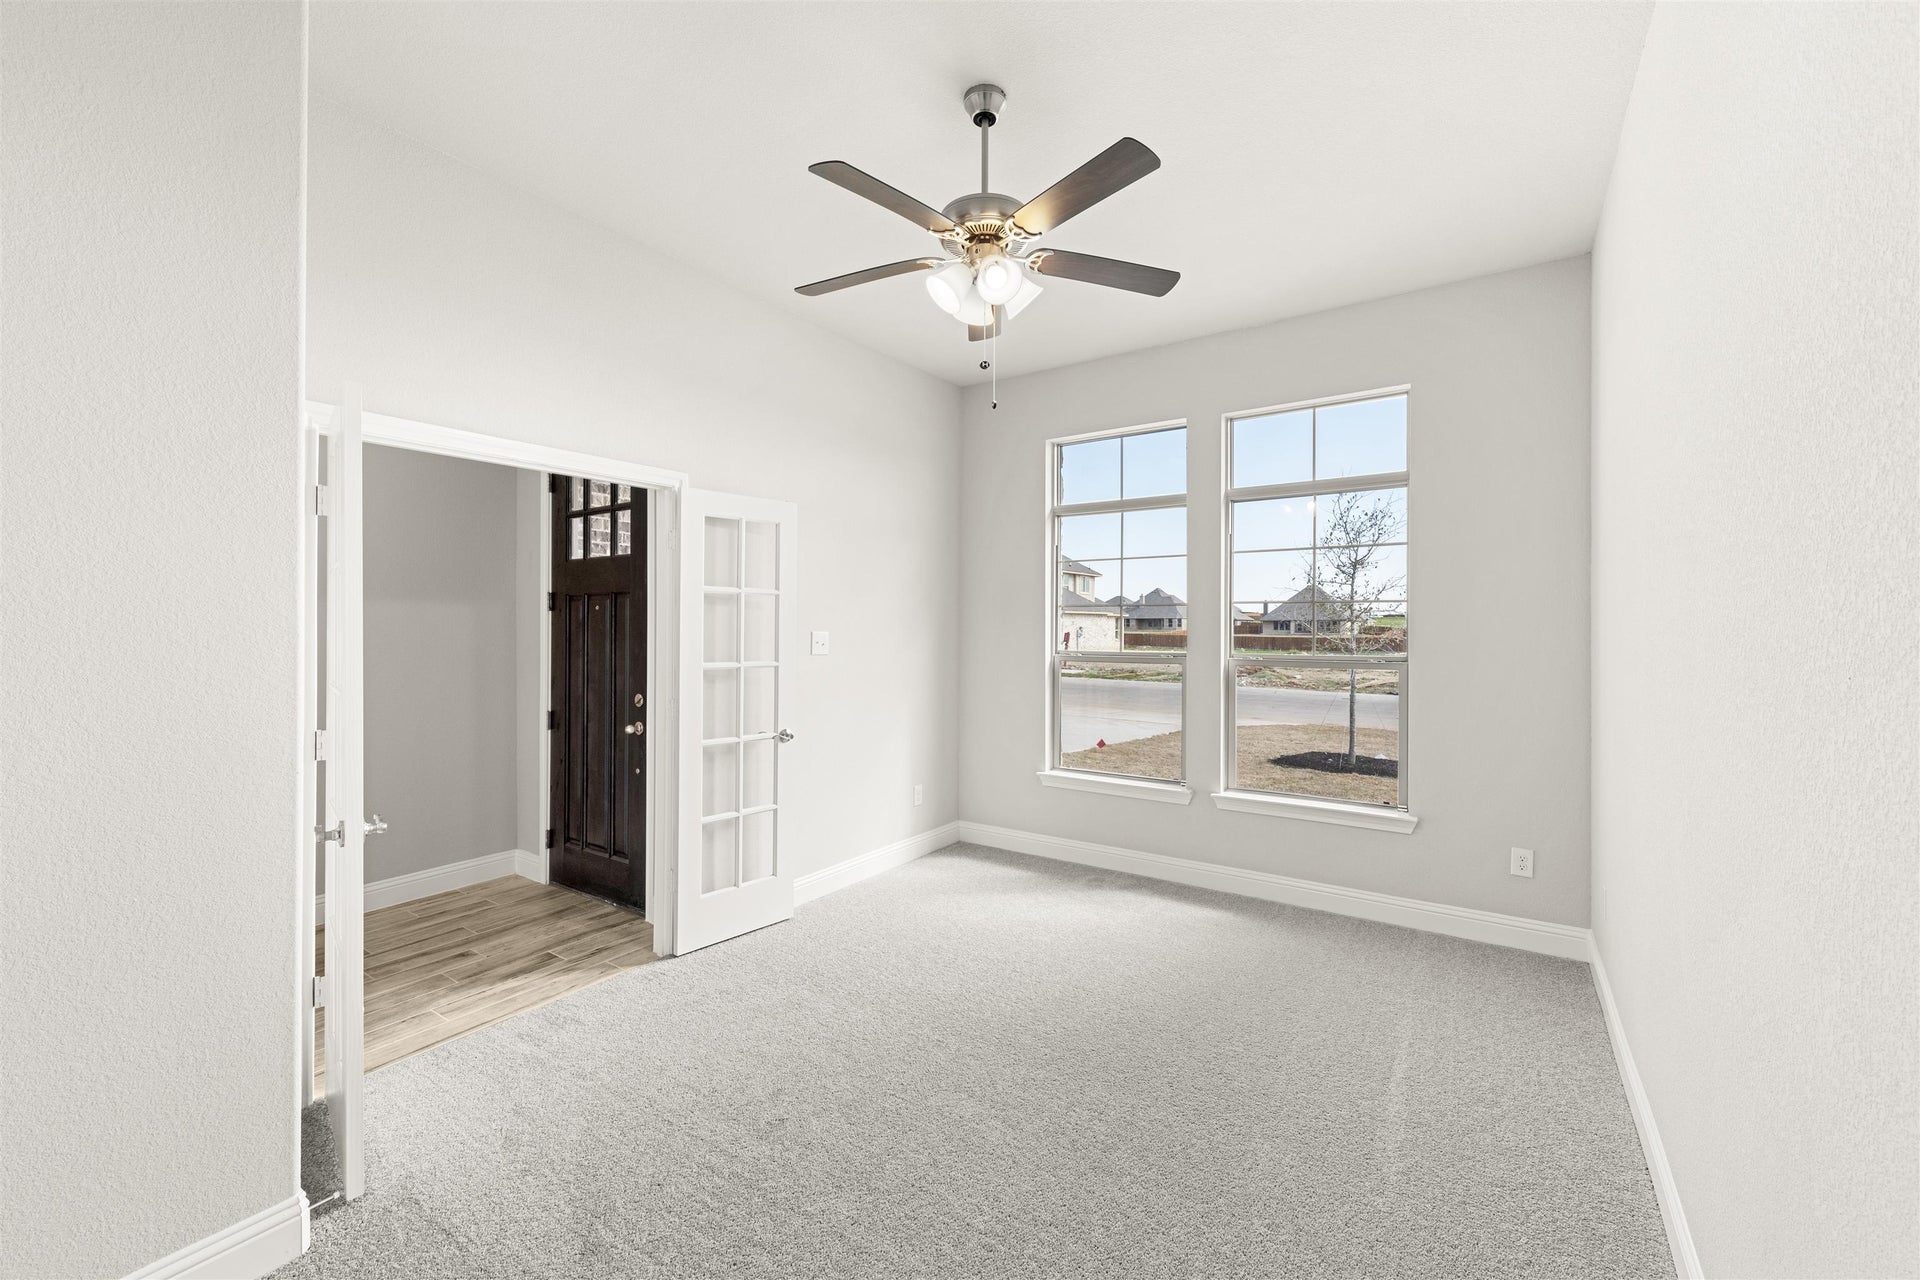 2,395sf New Home in Godley, TX